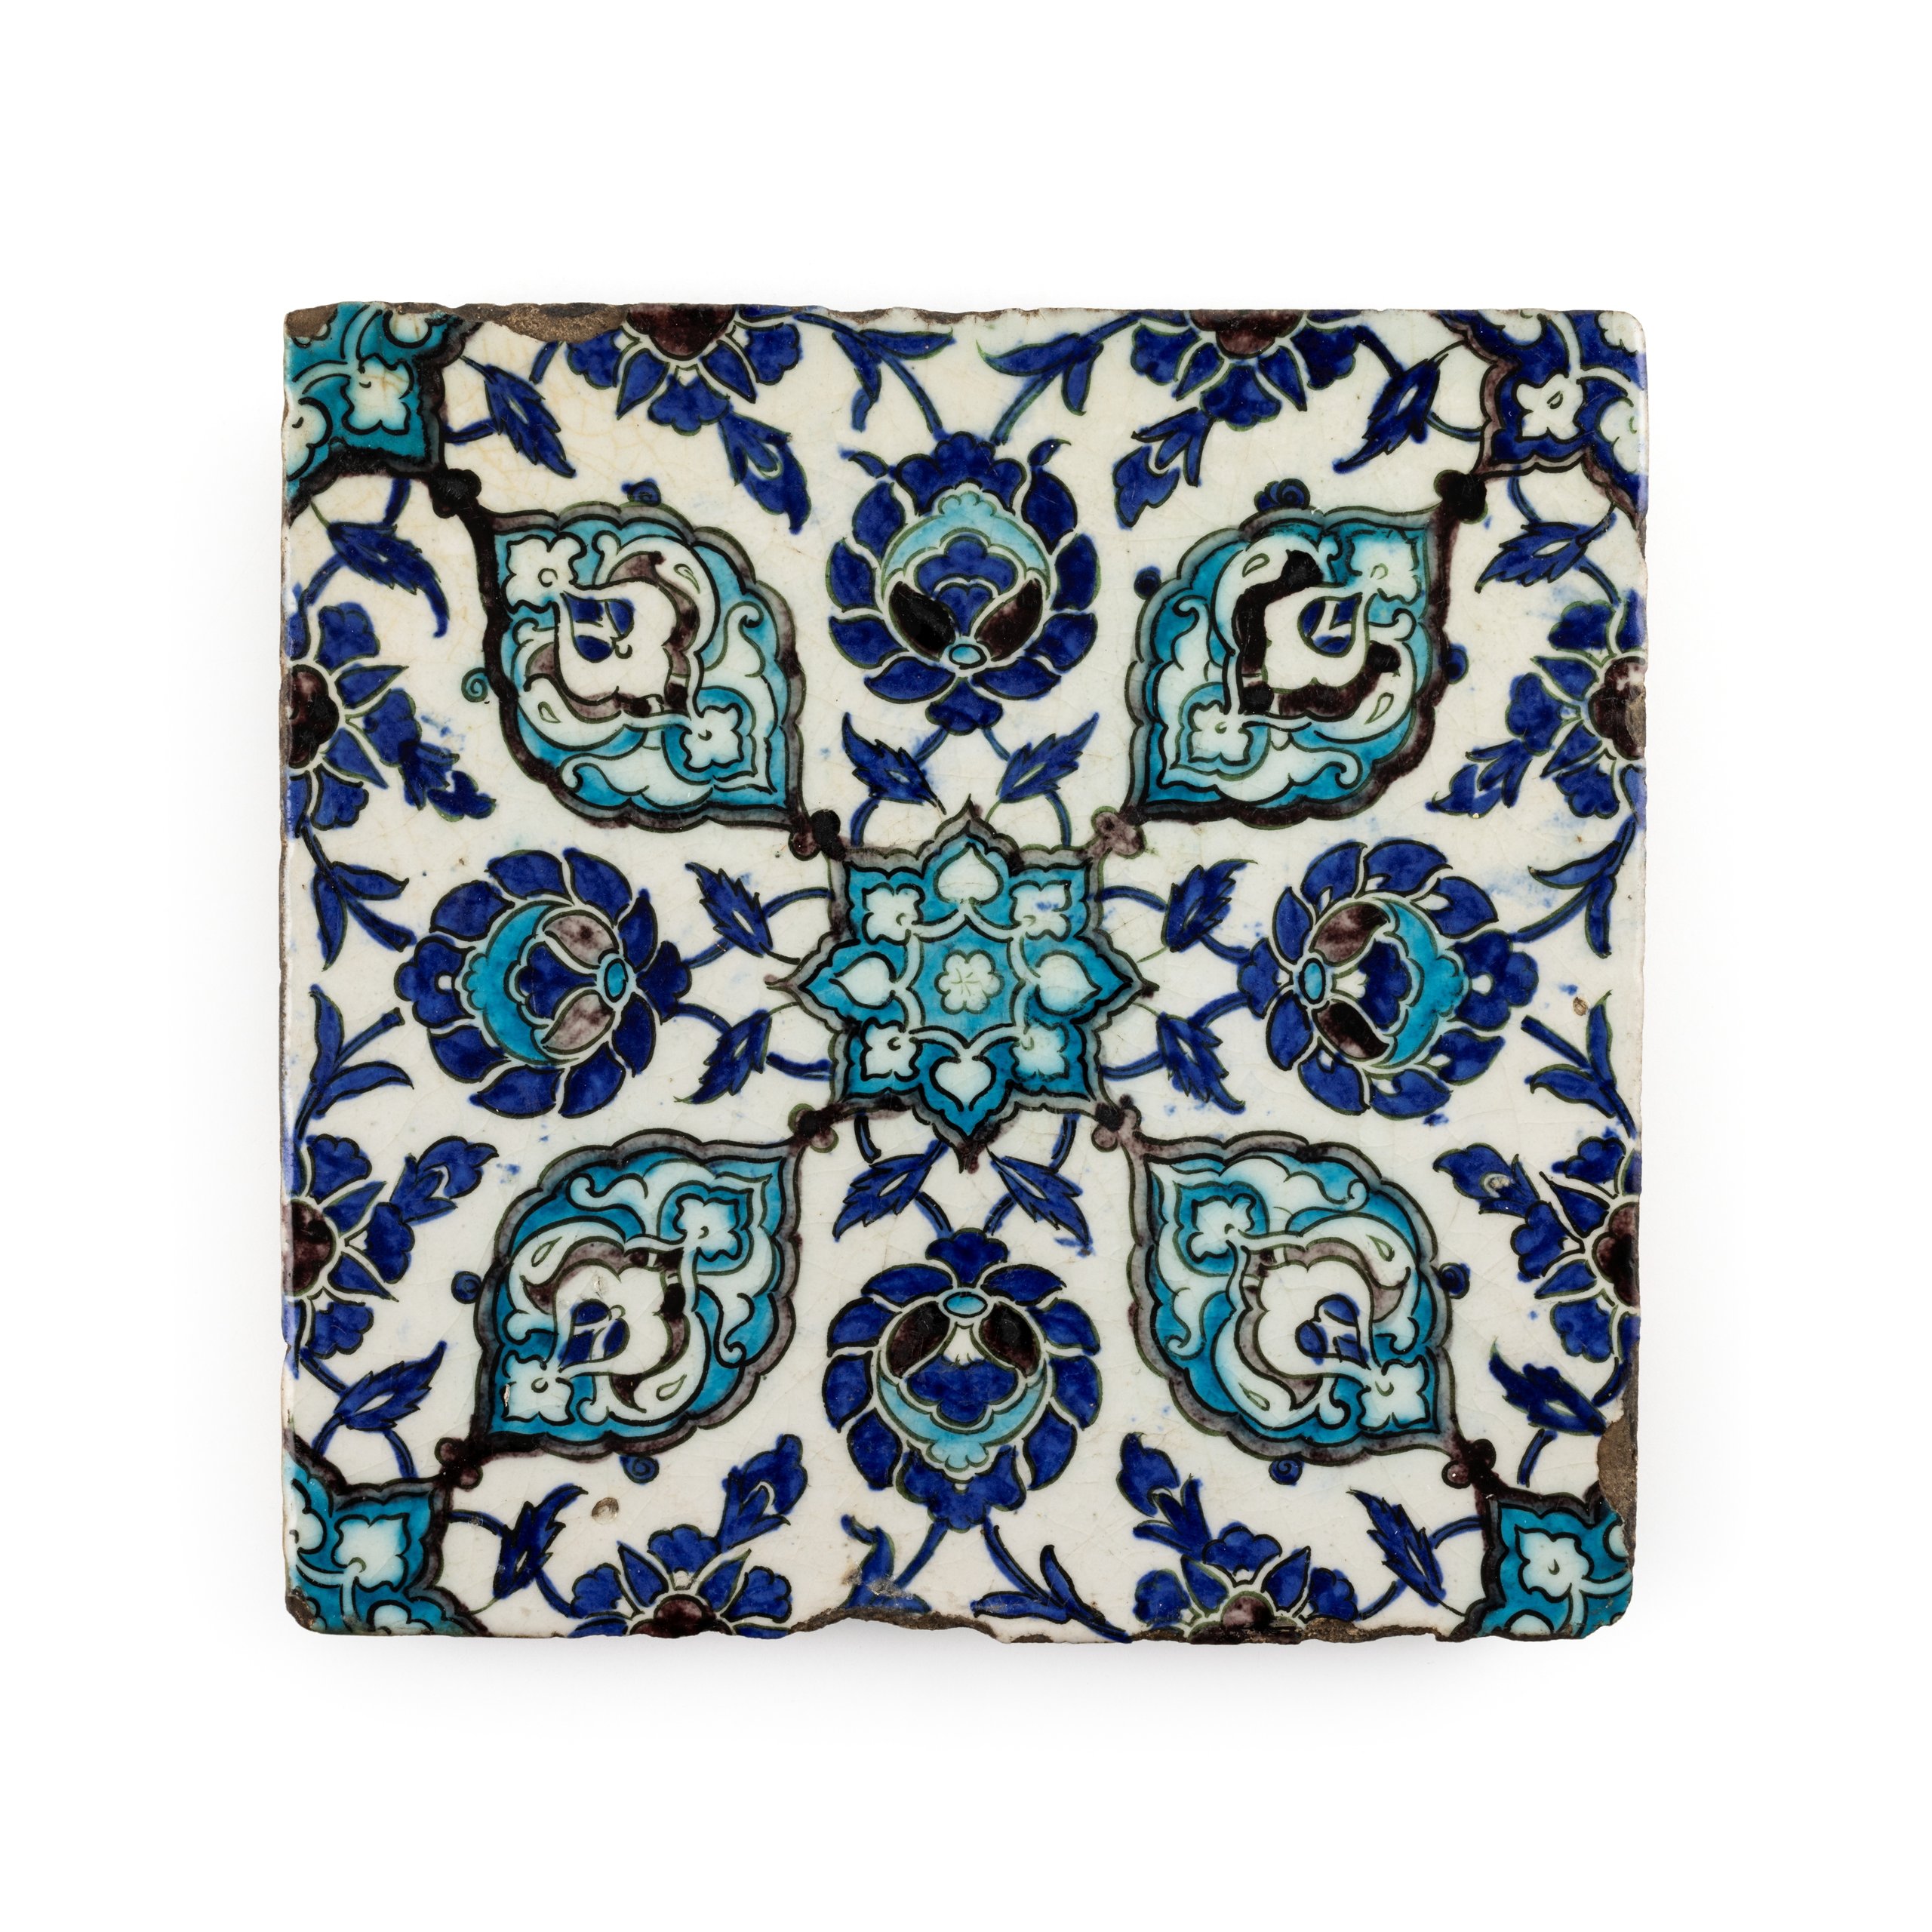 An earthenware tile from Damascus, Syria